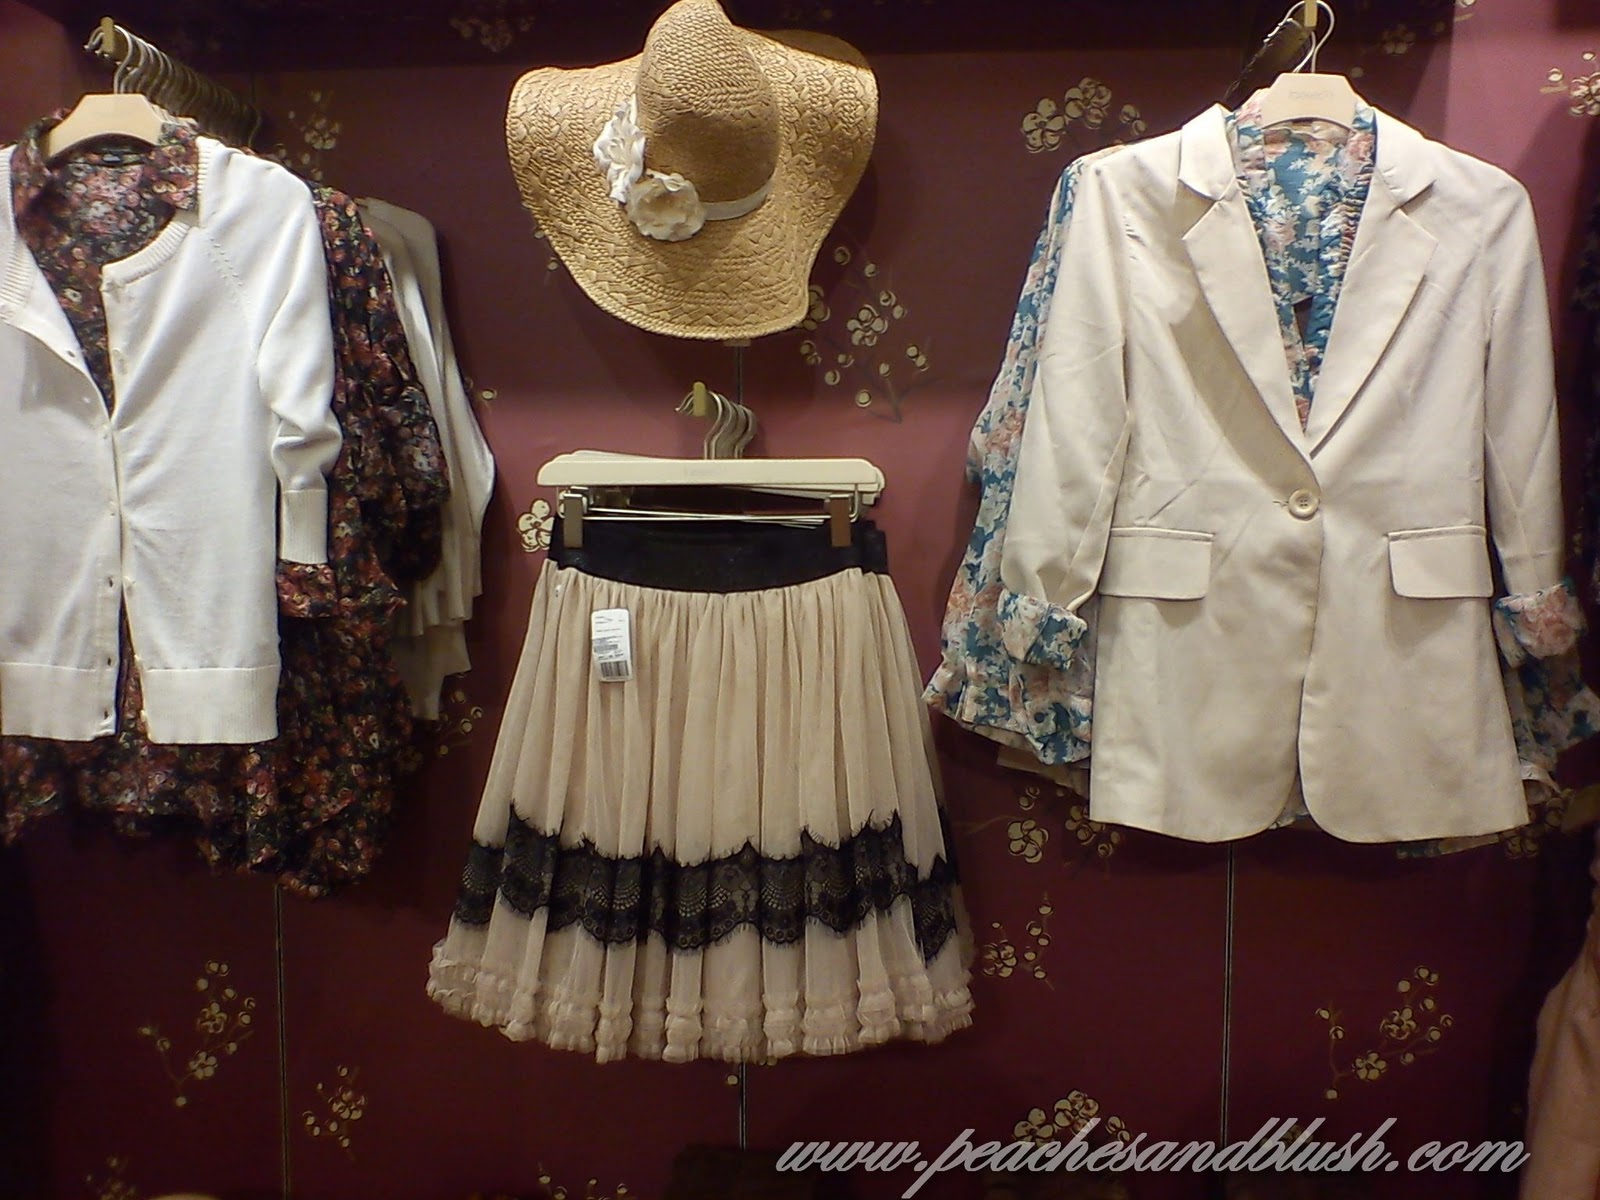 My favourite section- its like french farmer girl goes chic!